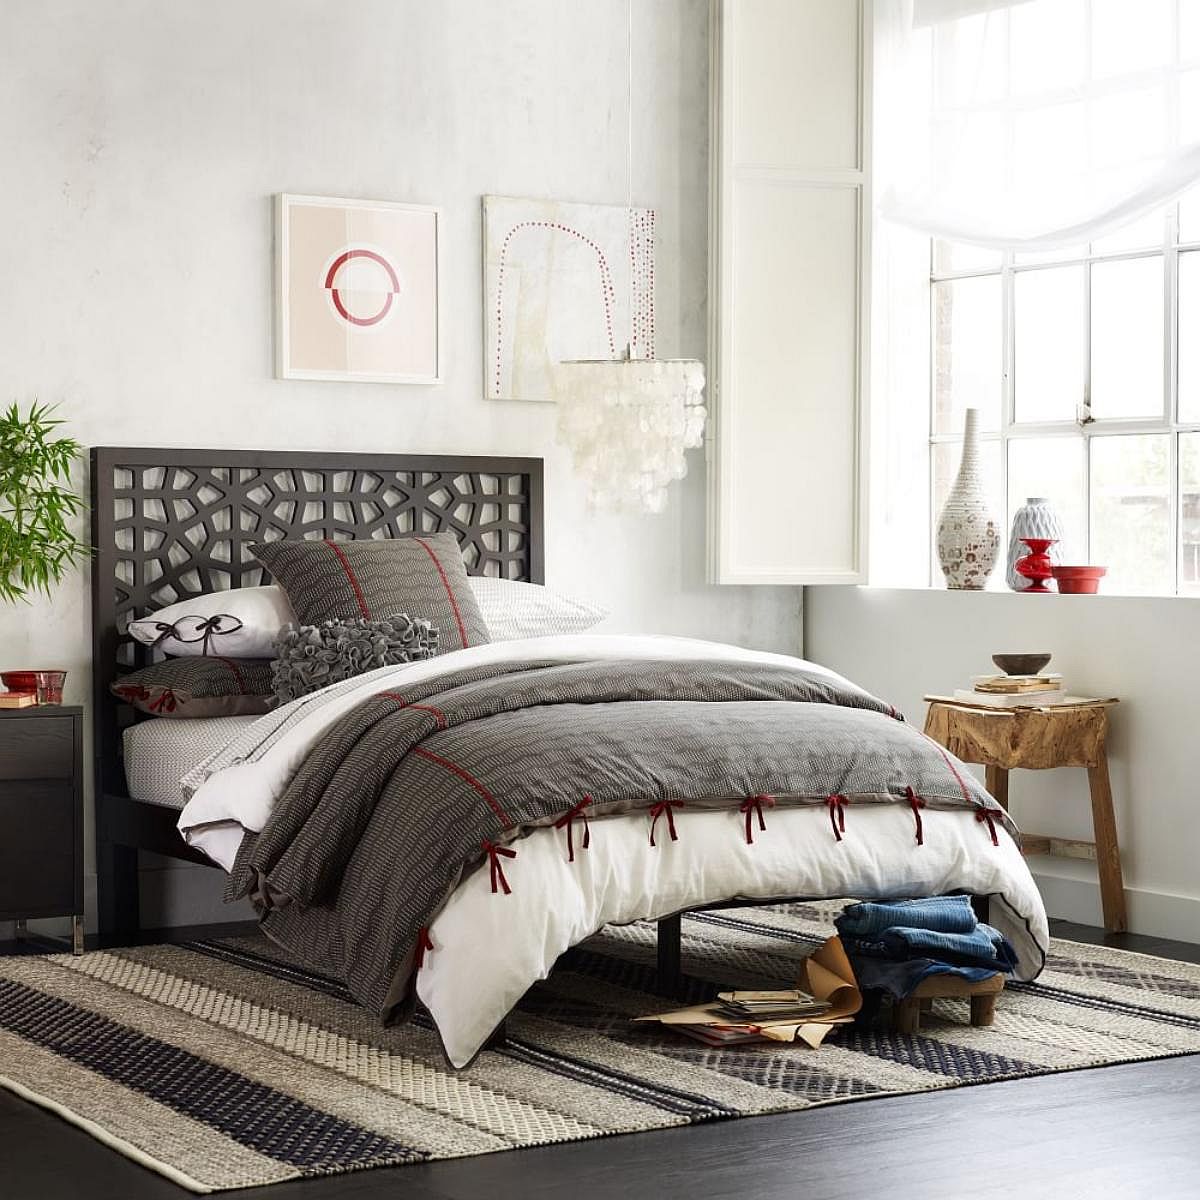 Morocco inspired headboard deisgn adds to the style of contemporary bedroom West Elm Finding the Right Headboard: 20 Contemporary Ideas to Get You Started!